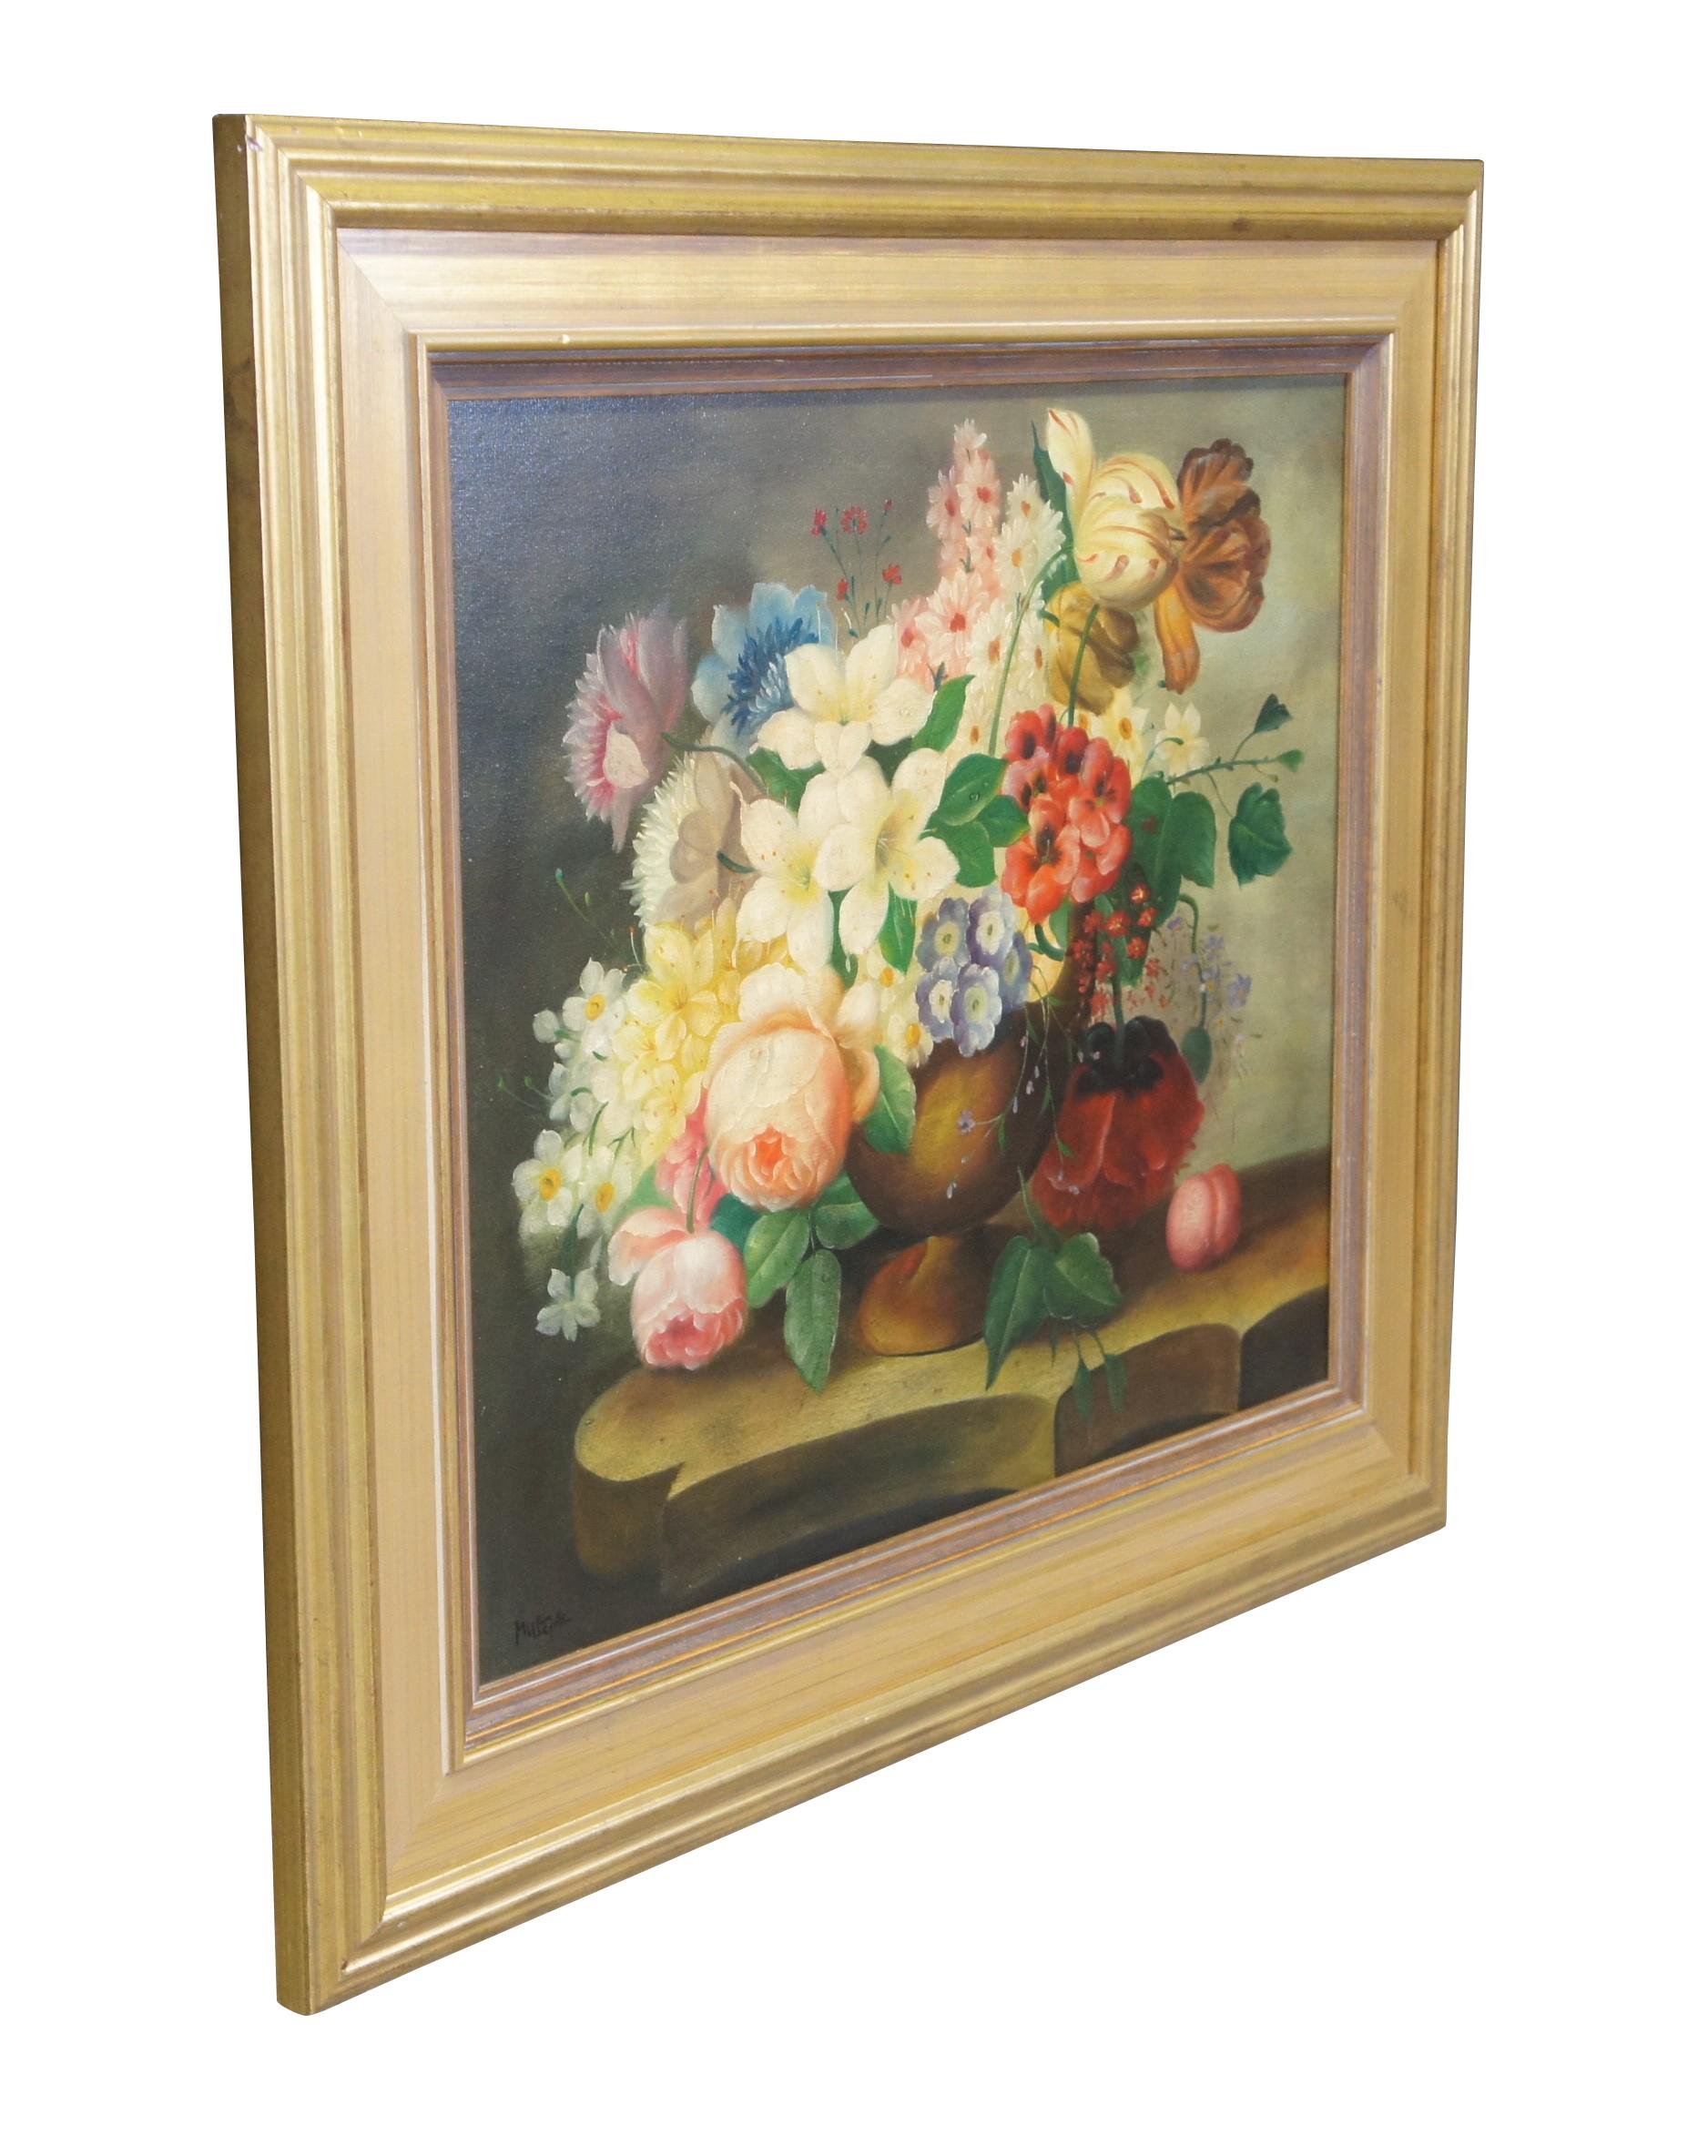 Vintage still life oil painting on canvas featuring a bouquet of flowers in a footed vase / urn on a scalloped table.  Signed lower left by artist.  Framed in gold.

Dimensions:
31.5